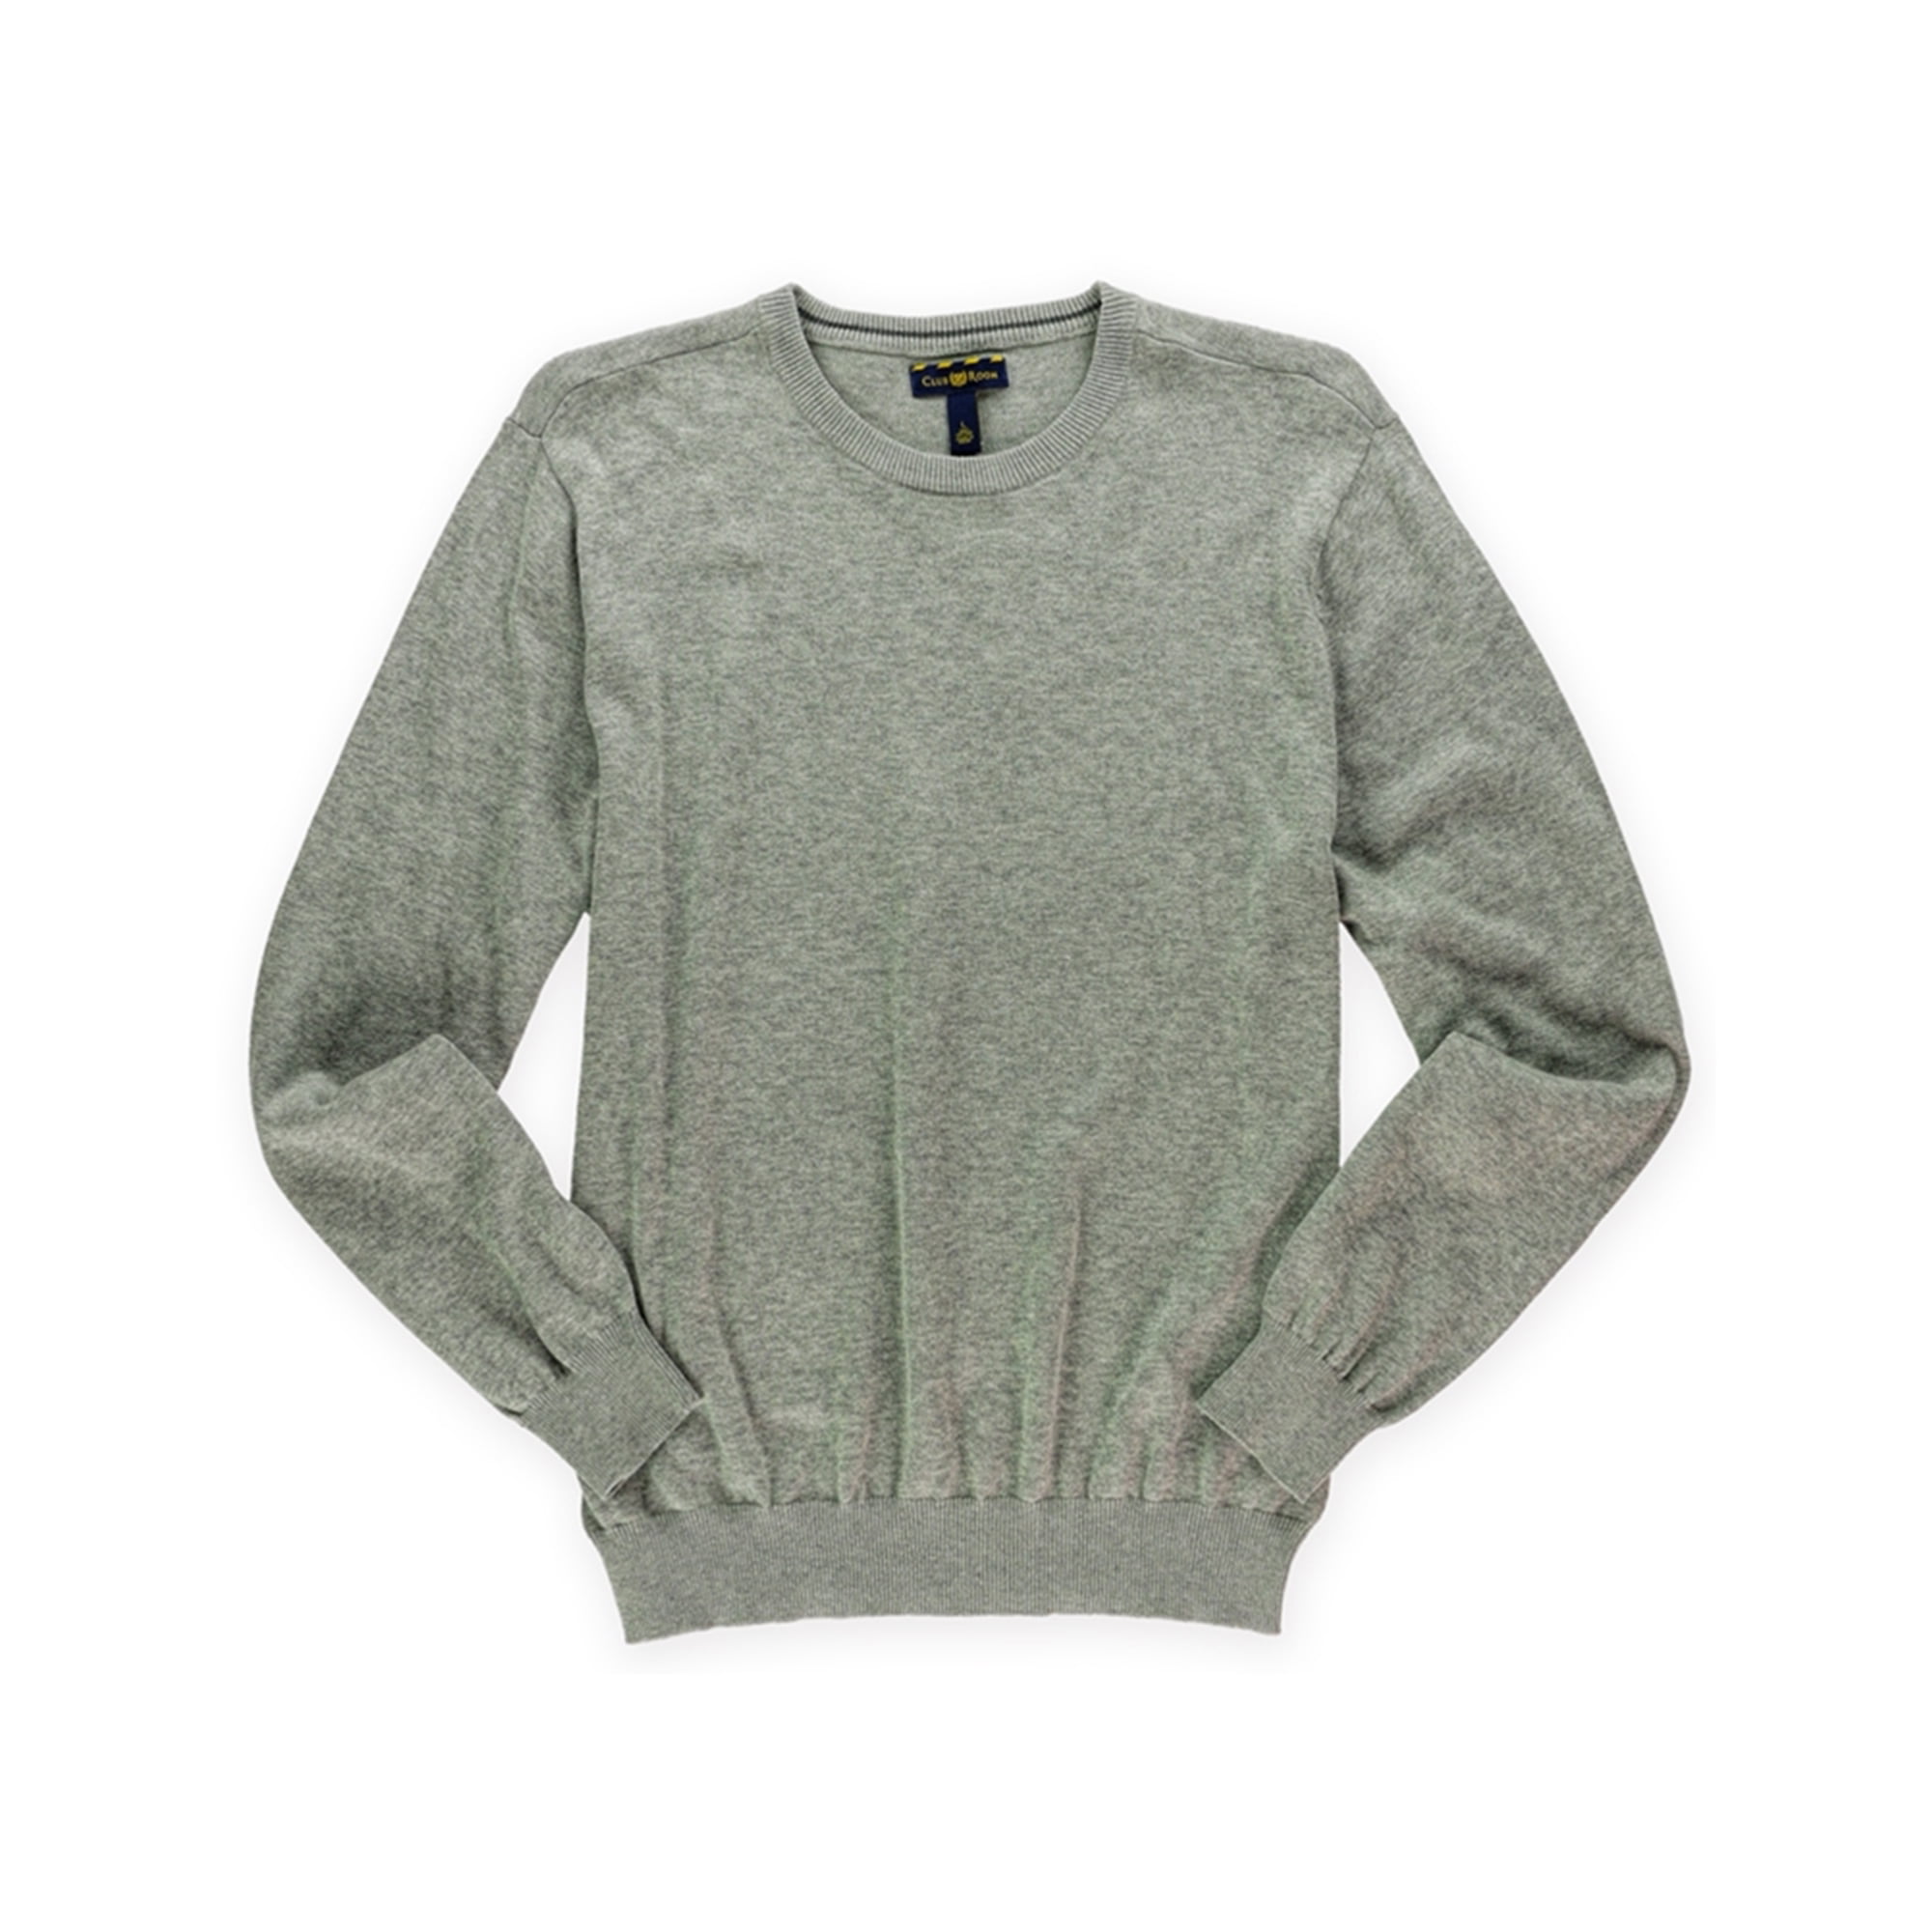 Club Room - Club Room Mens Solid Knit Pullover Sweater, Grey, Small ...